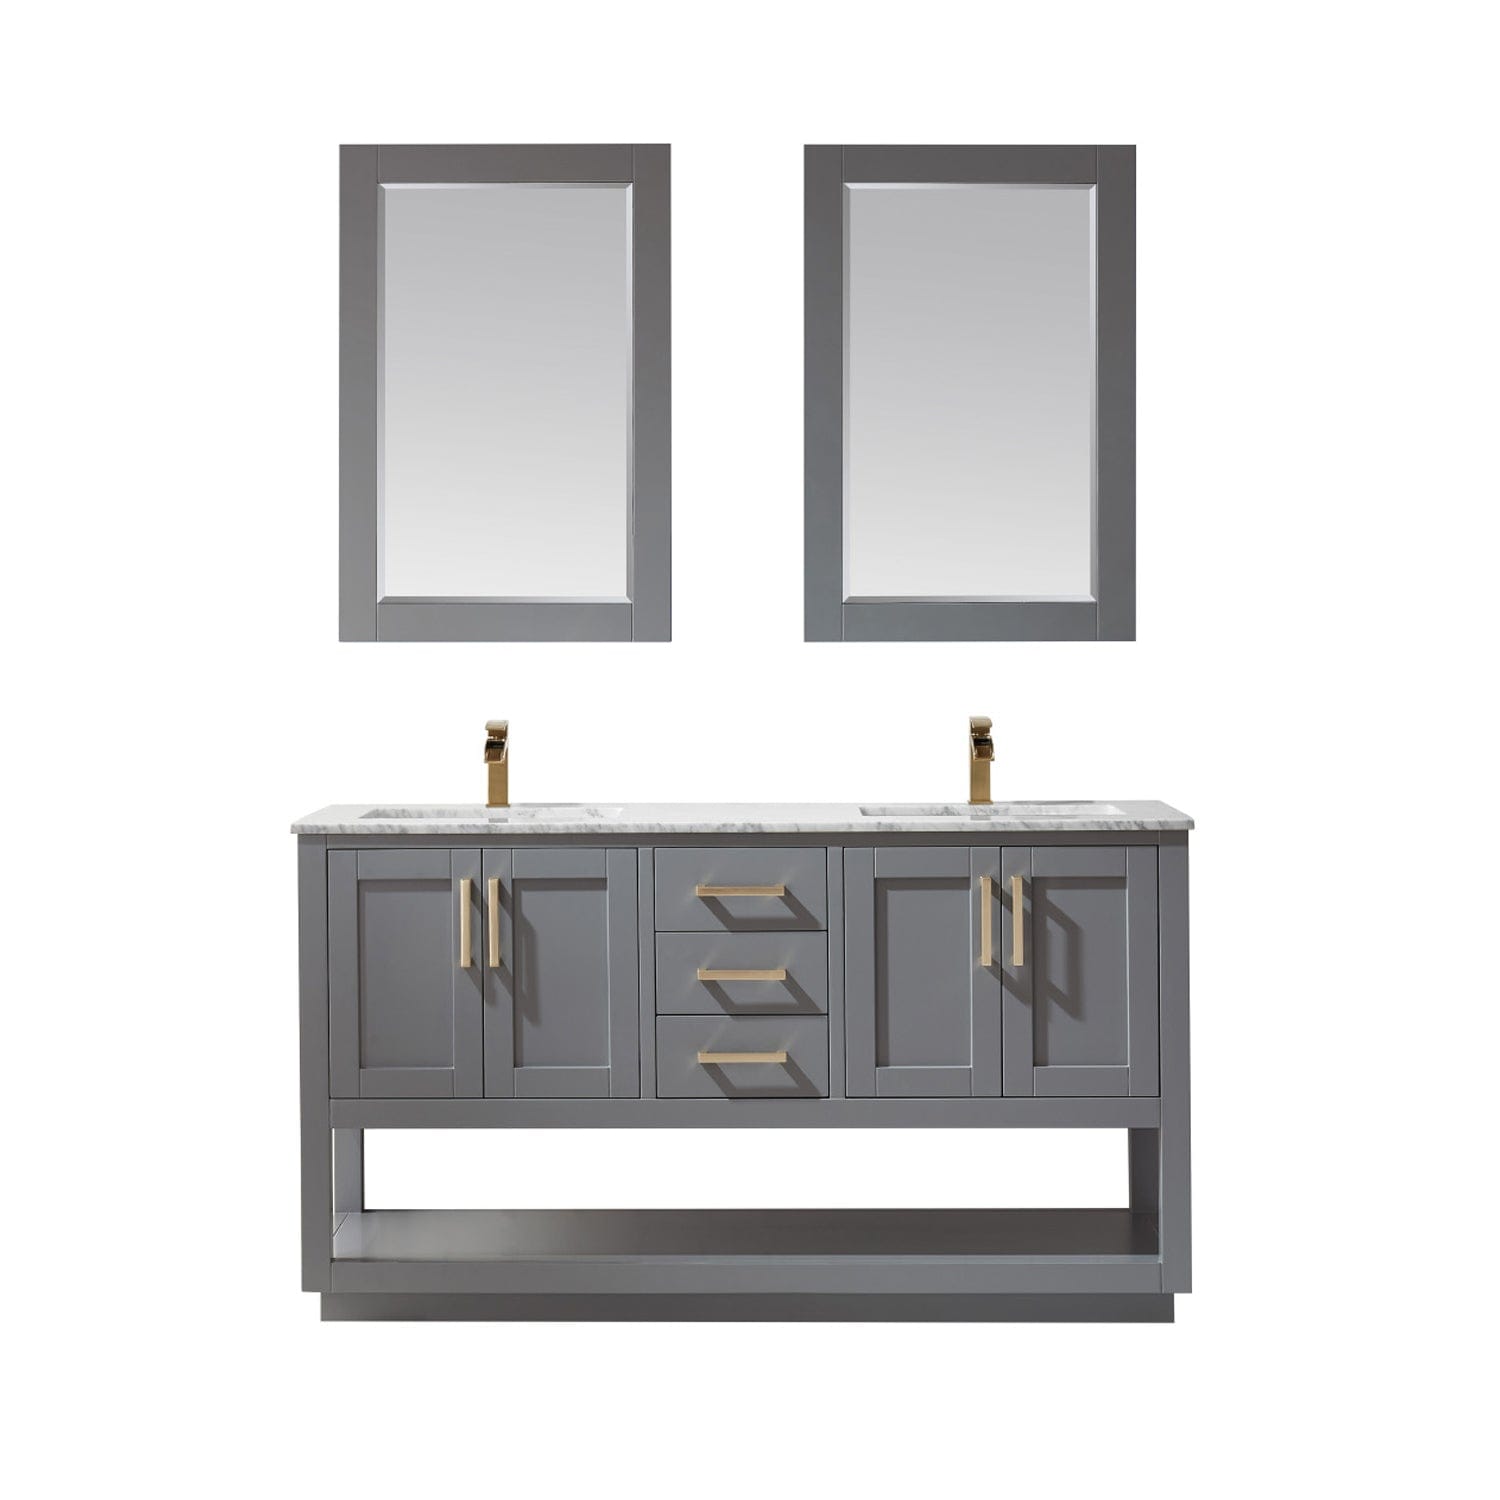 Altair Remi 60" Double Bathroom Vanity Set in Gray and Carrara White Marble Countertop with Mirror 532060-GR-CA - Molaix631112971515Vanity532060-GR-CA